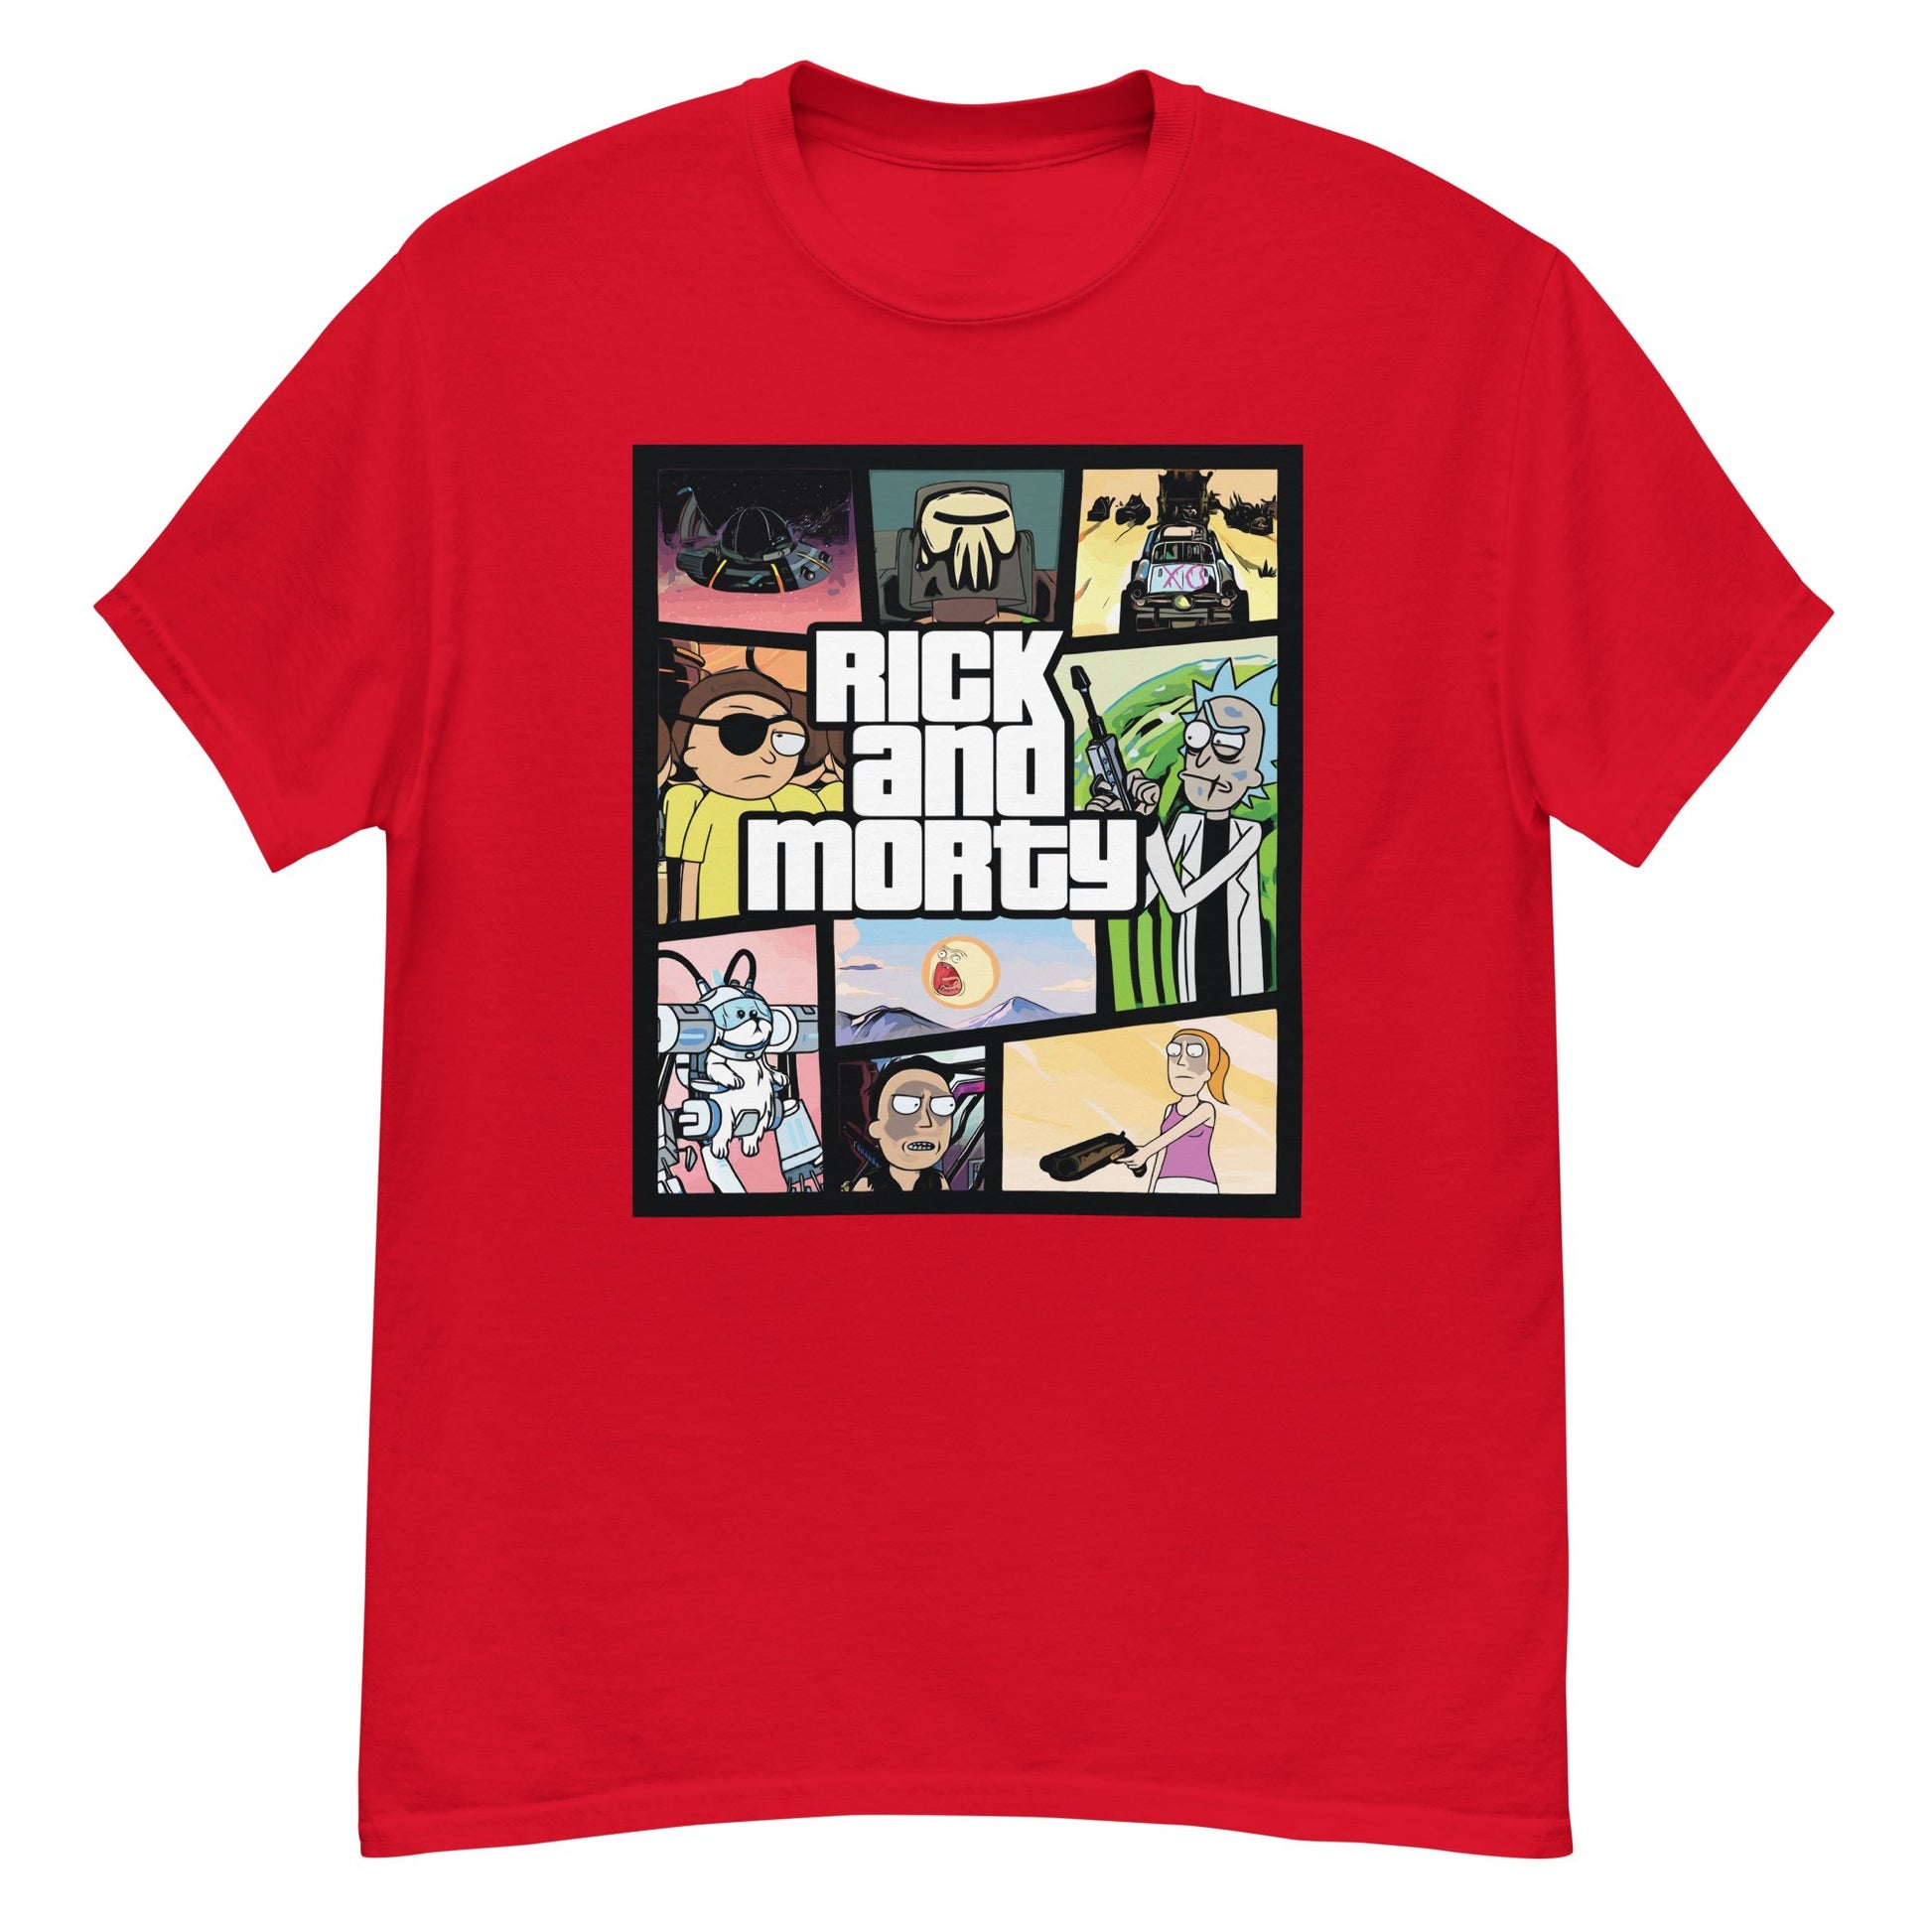 Ricky and Morty as GTA T-shirt - The Truth Graphics